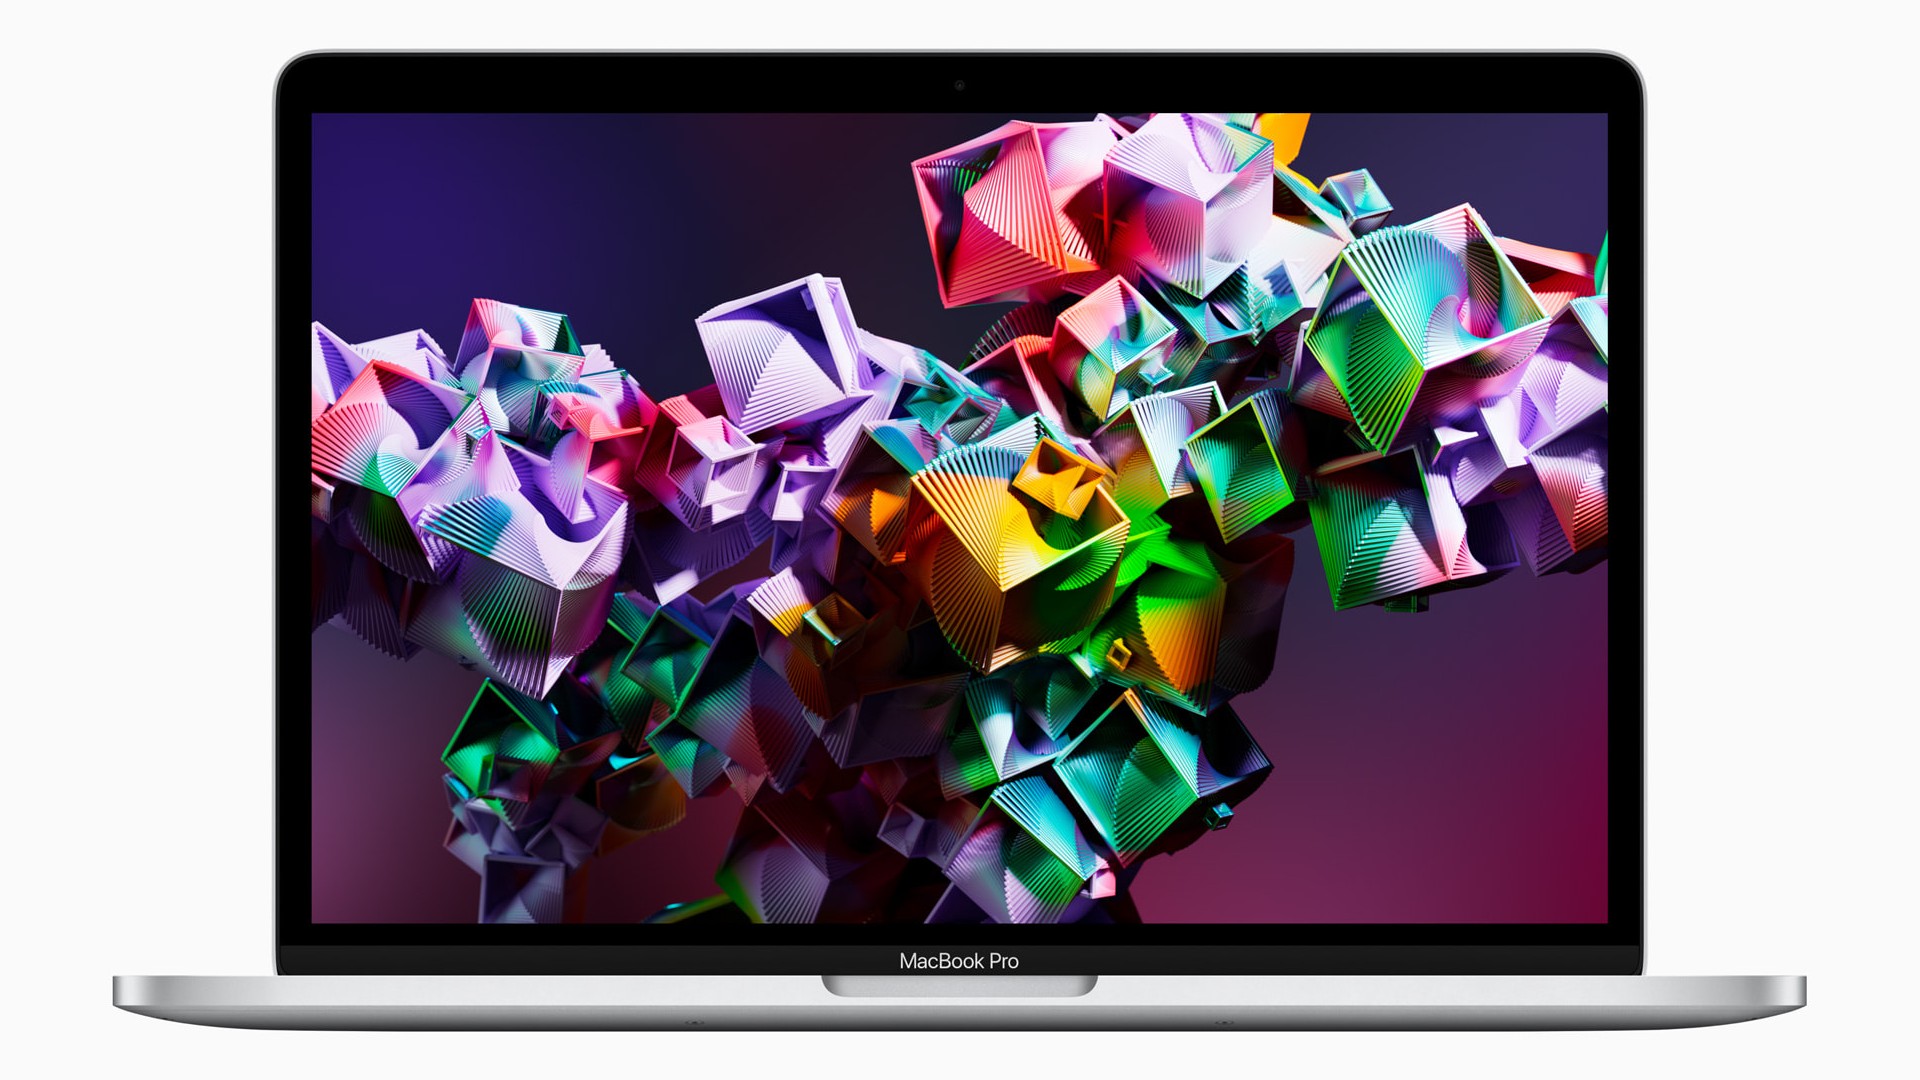 Product shot of 13-inch Macbook Pro 2022 showing abstract graphics on screen